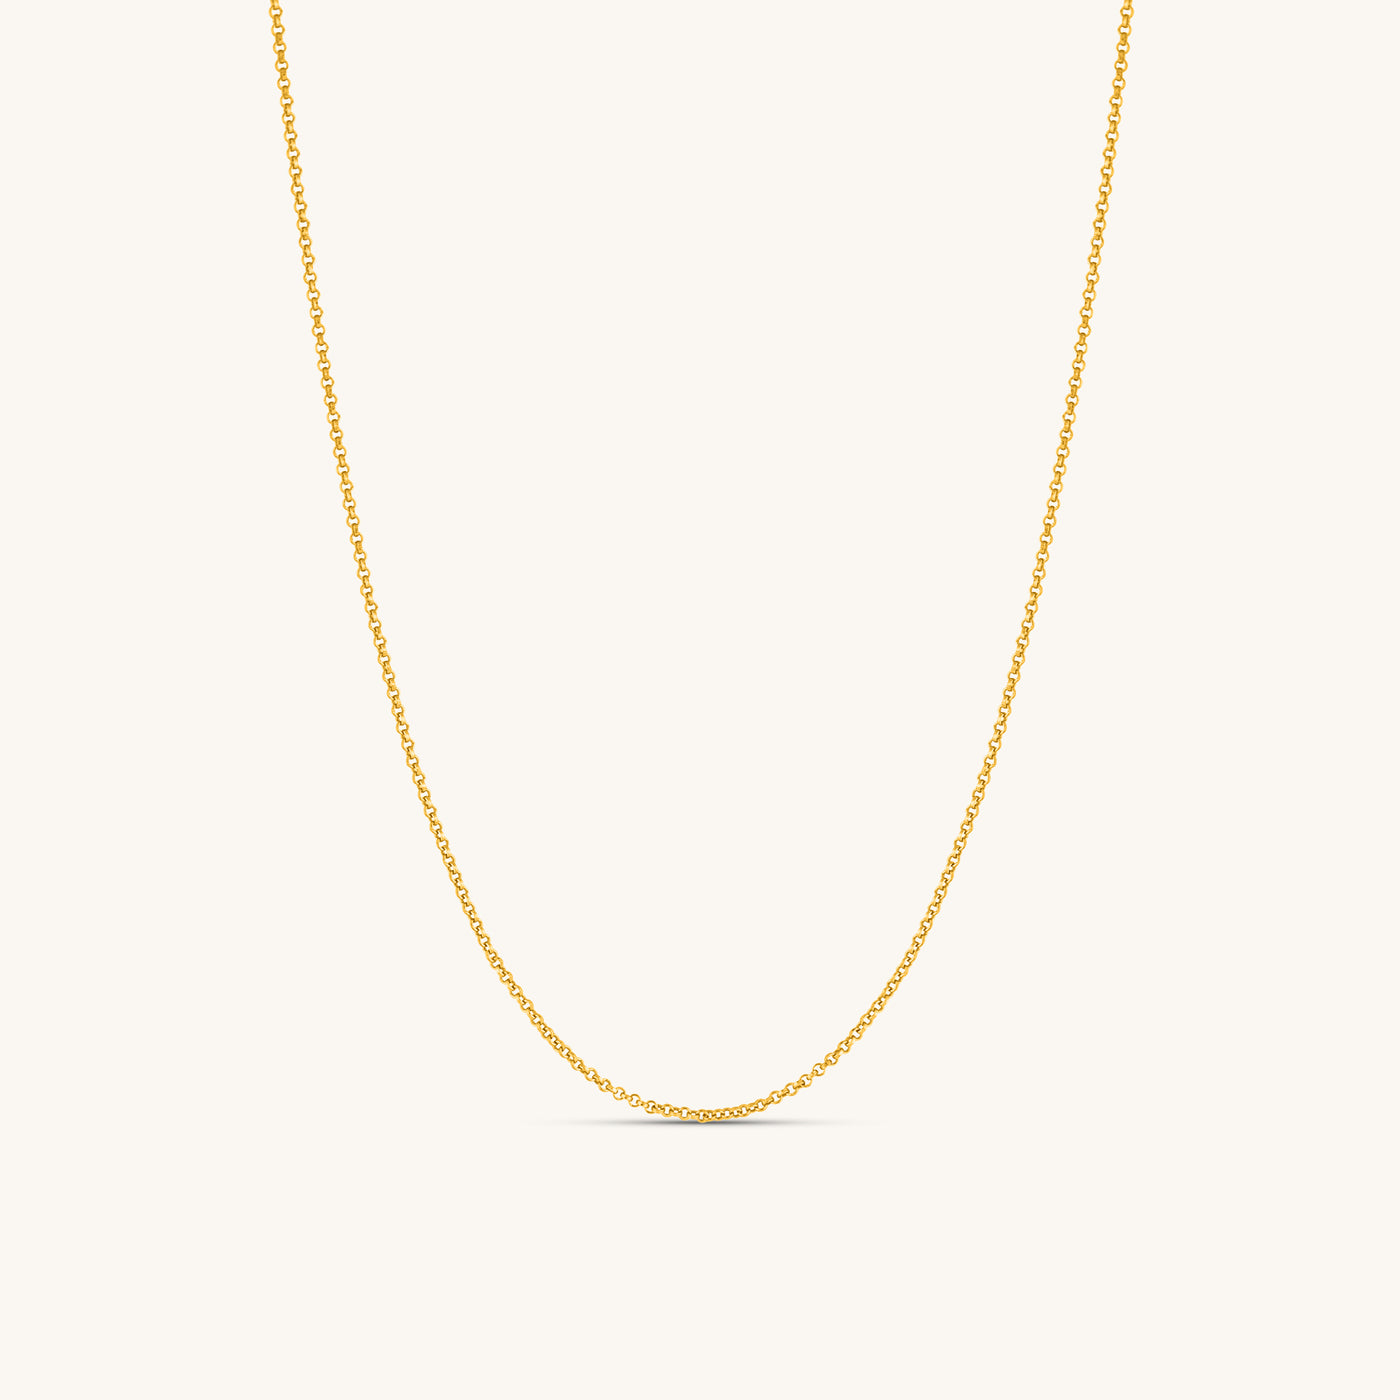 Modern Minimalist Jewelry Women's Necklace Choker Thin Slick Cable Chain 1mm 18k Gold layered on 925 Sterling Silver